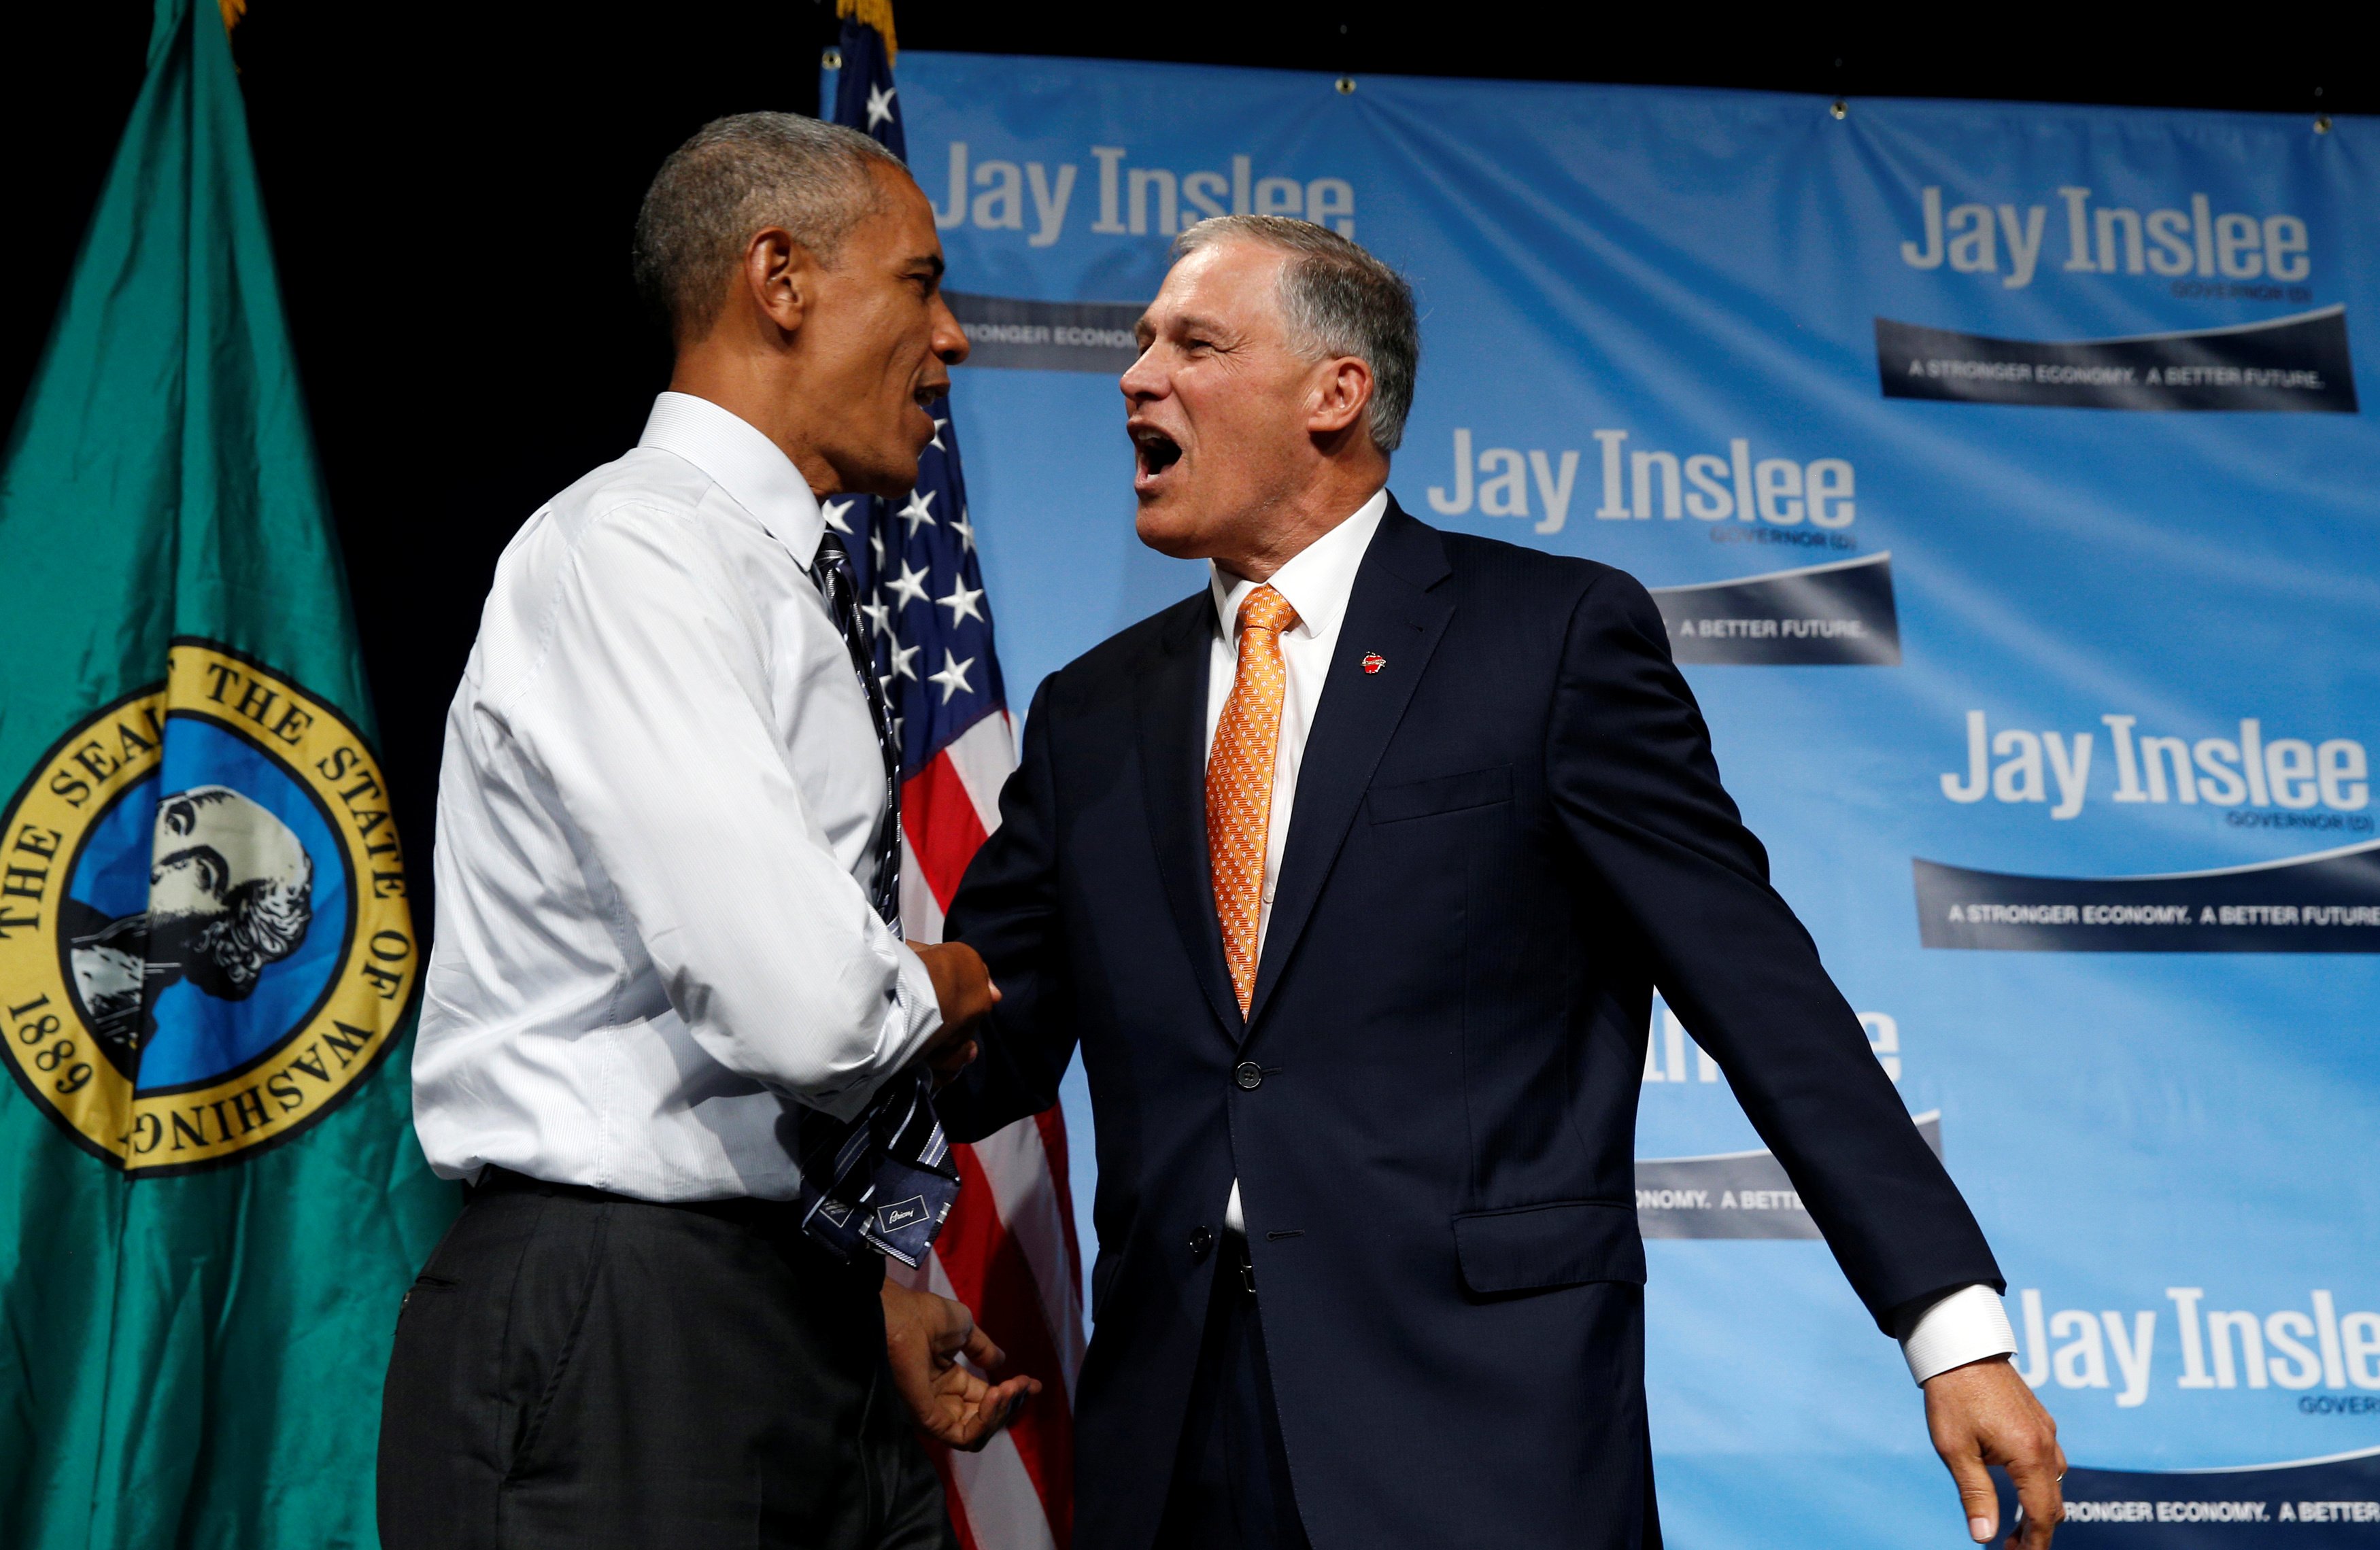 U.S. President Barack Obama takes the stage to speak at a fundraiser for Washington Governor Jay Inslee in Seattle